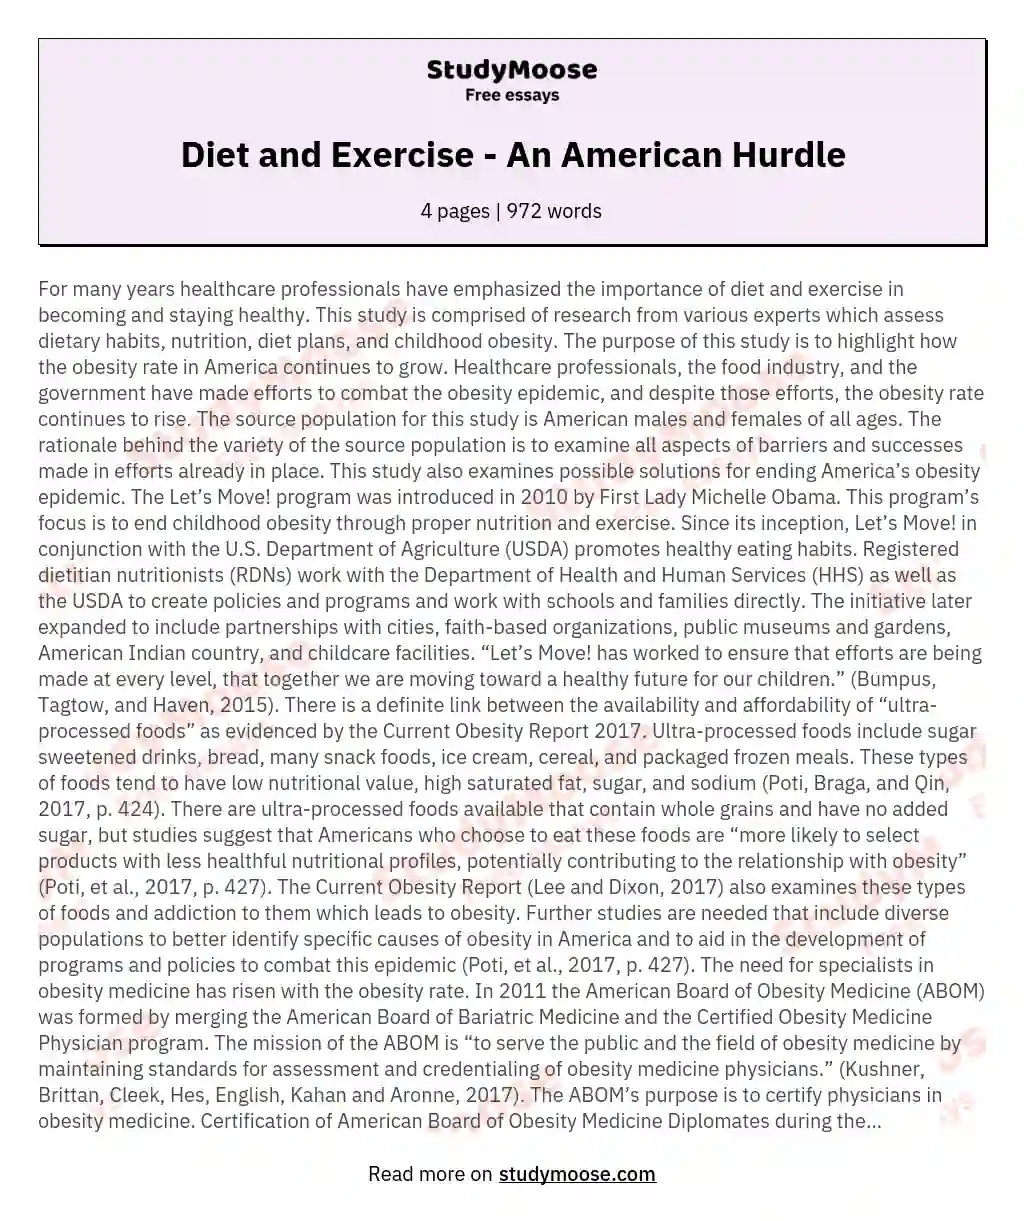 what is the american diet essay